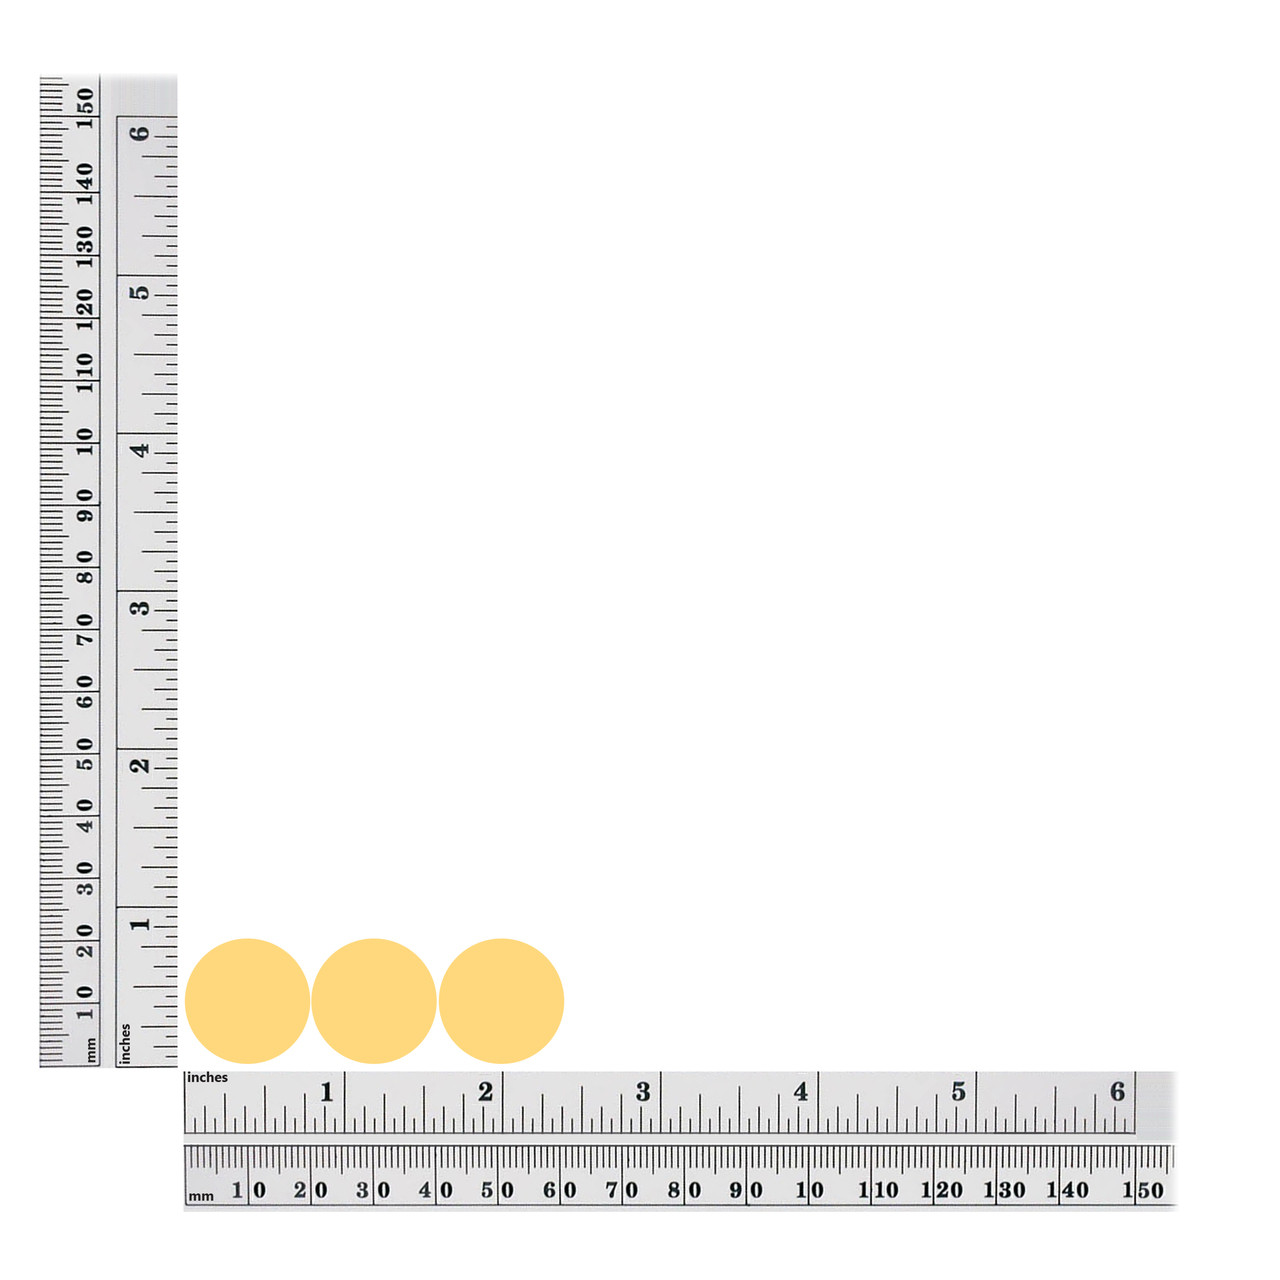 20mm sequin size chart